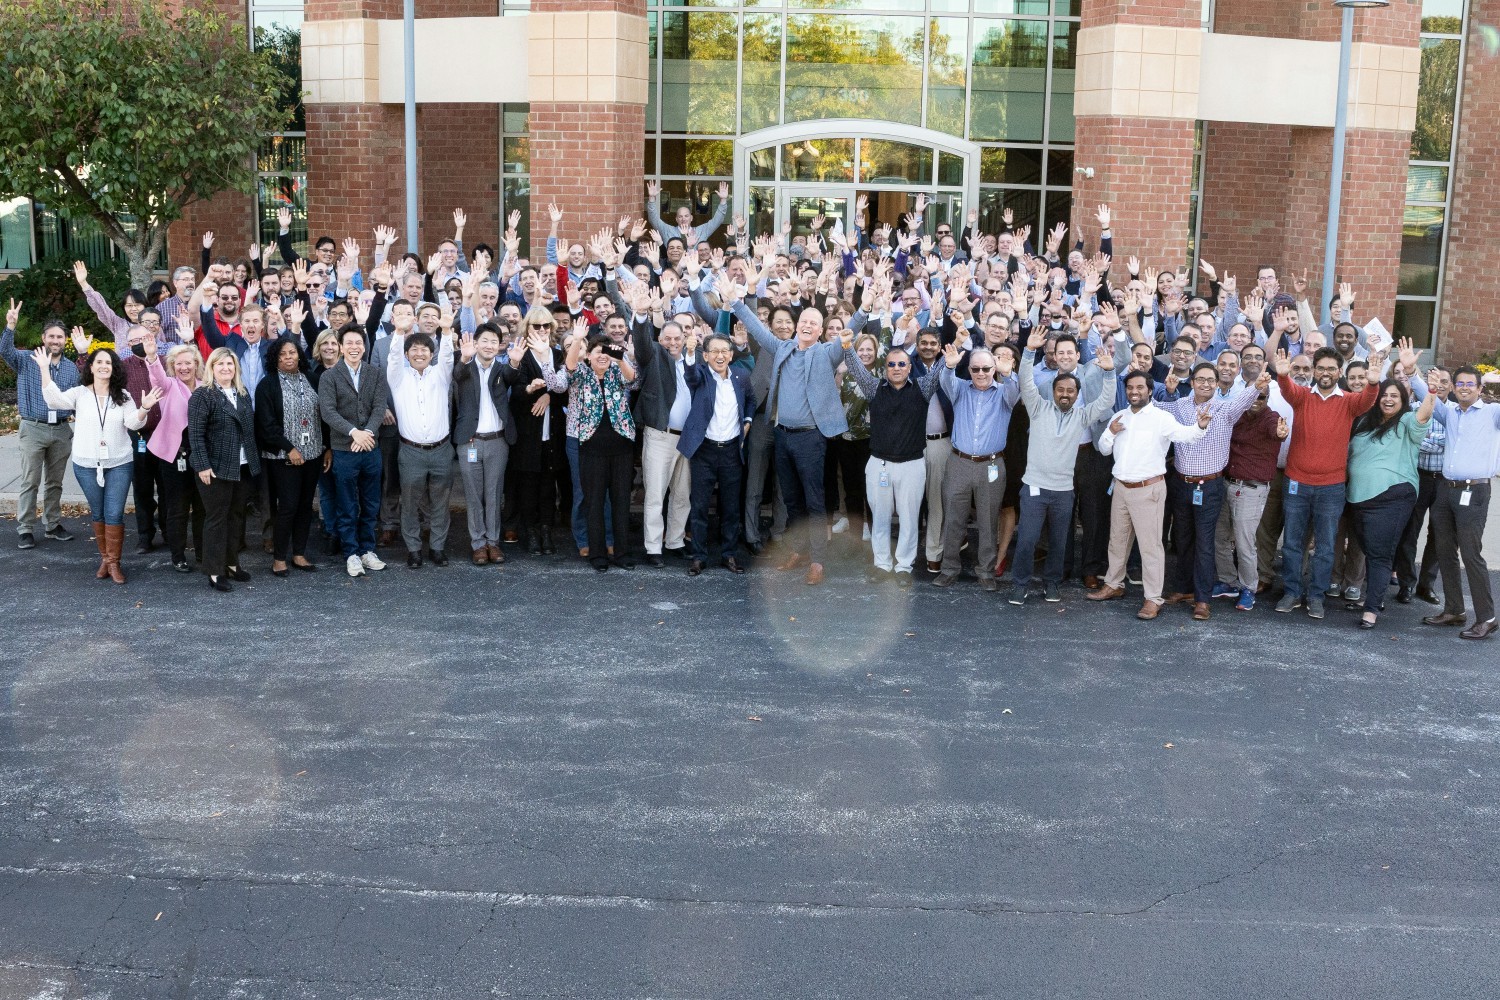 Together again! Team members come together at Ricoh's U.S. headquarters in Exton, PA